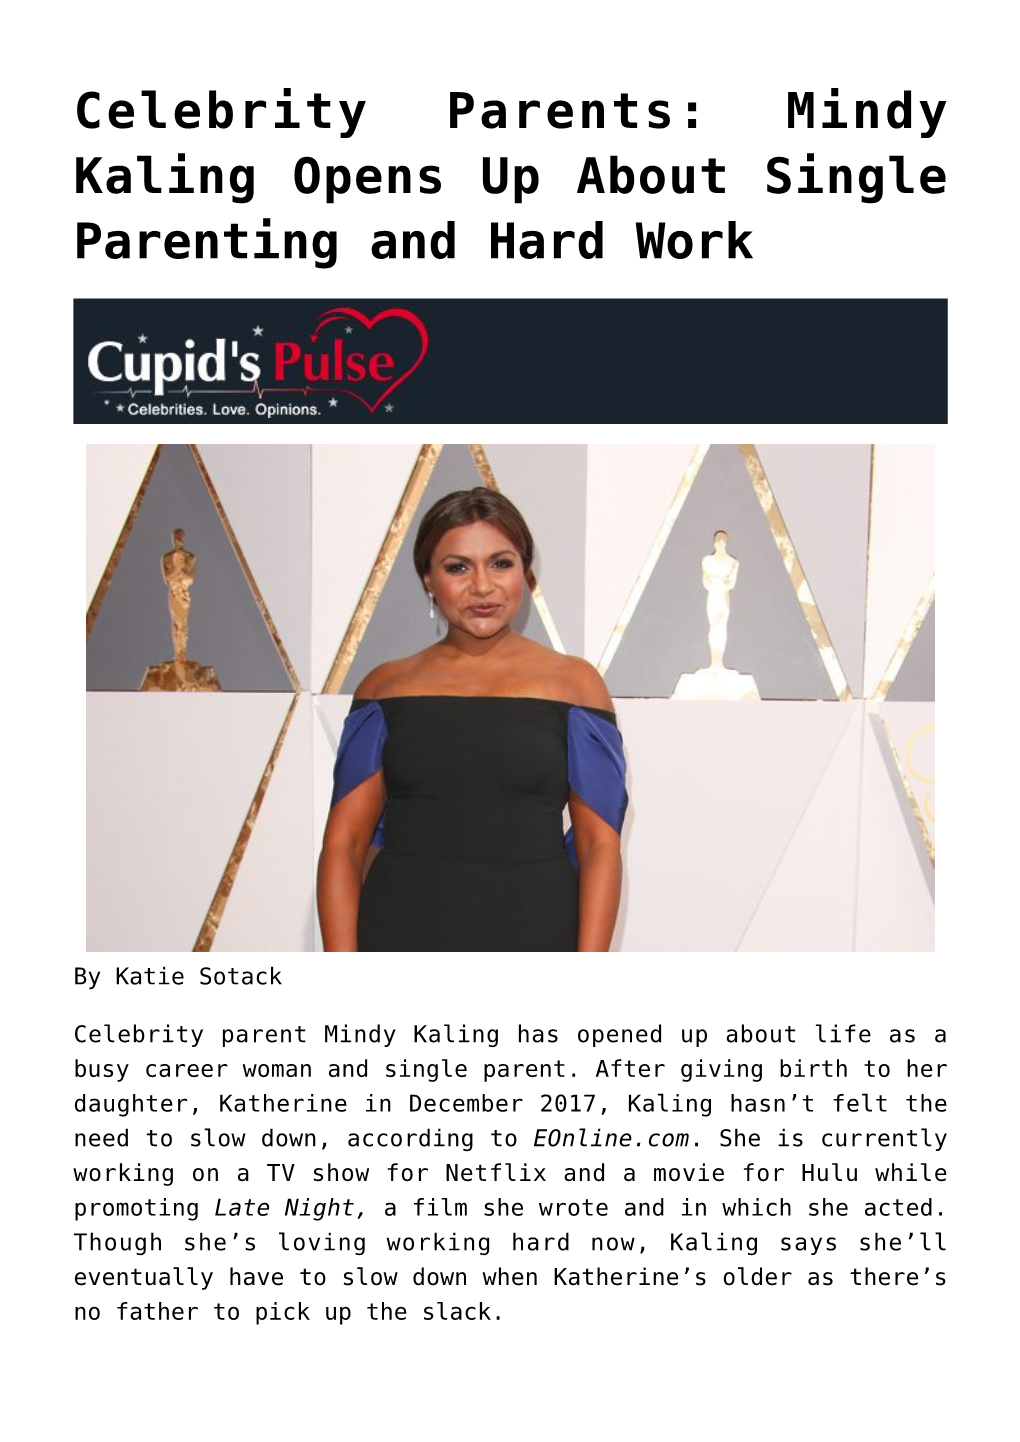 Celebrity Parents: Mindy Kaling Opens up About Single Parenting and Hard Work